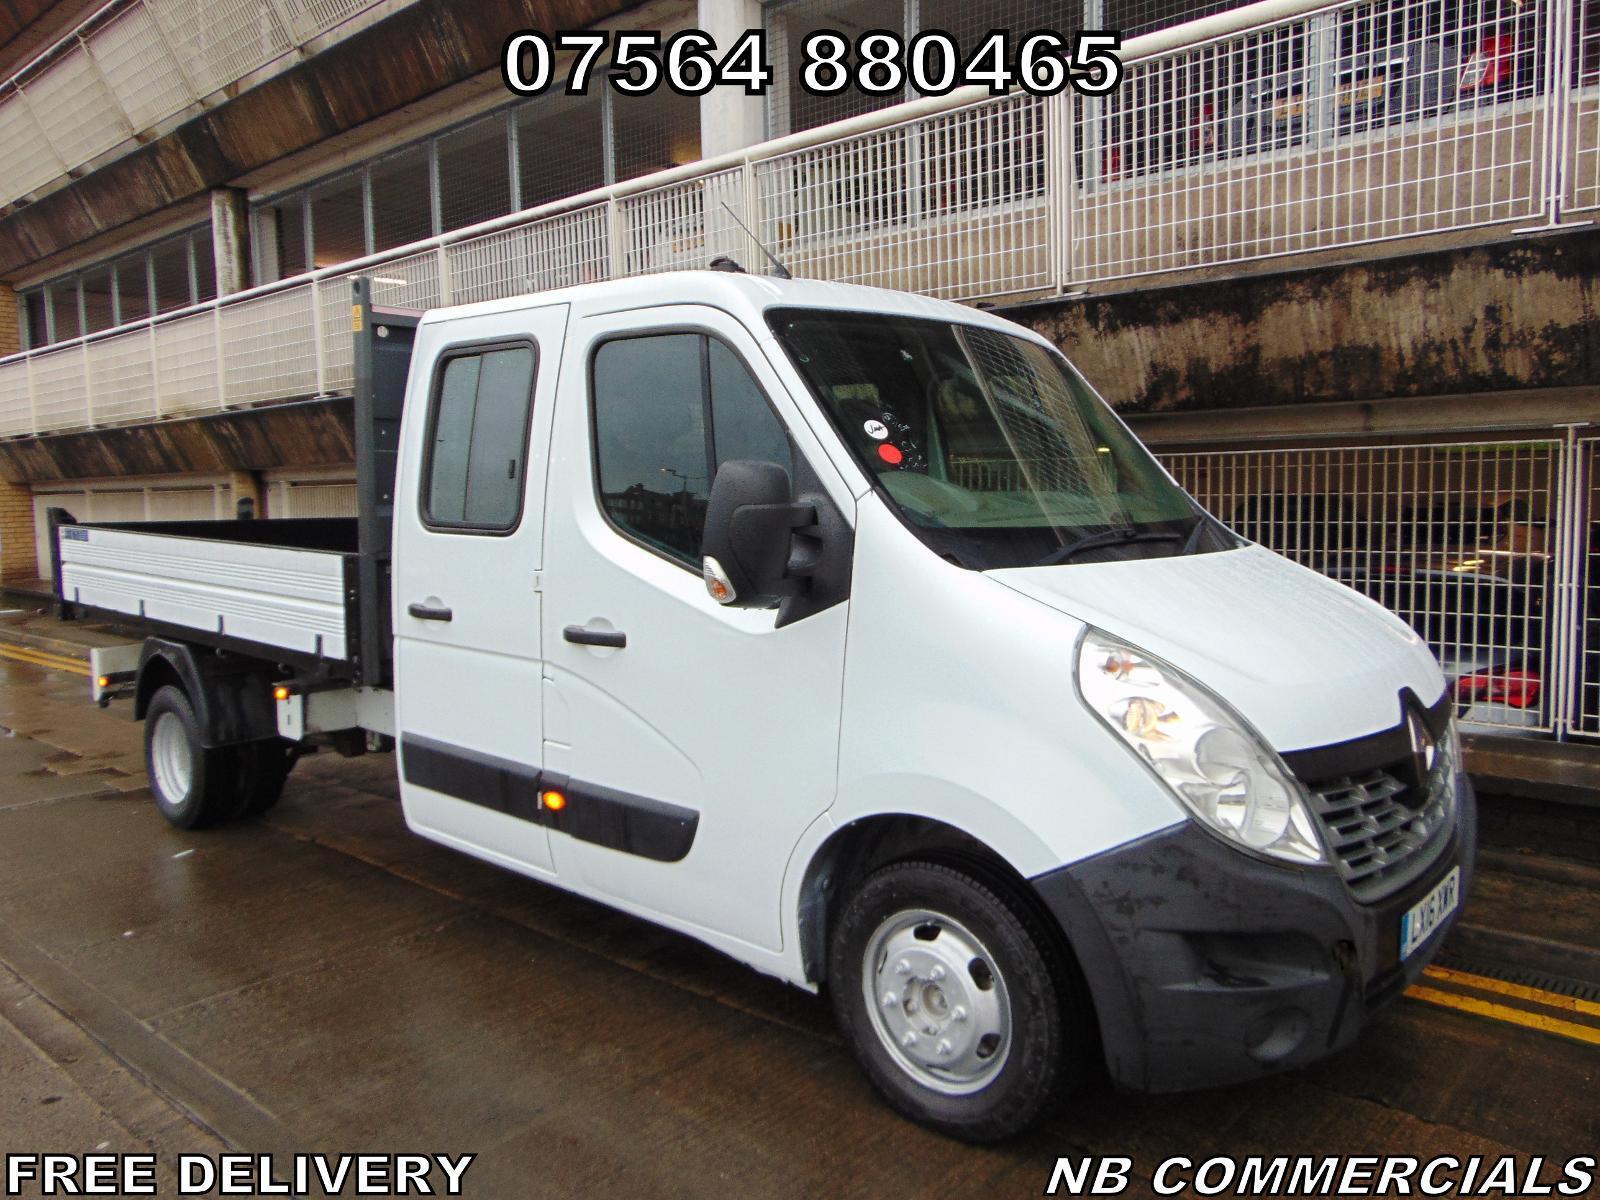 Bid on RENAULT MASTER 2016 TIPPER: CREW CAB, 7 SEATS, TOW BAR, 63K MILES- Buy &amp; Sell on Auction with EAMA Group